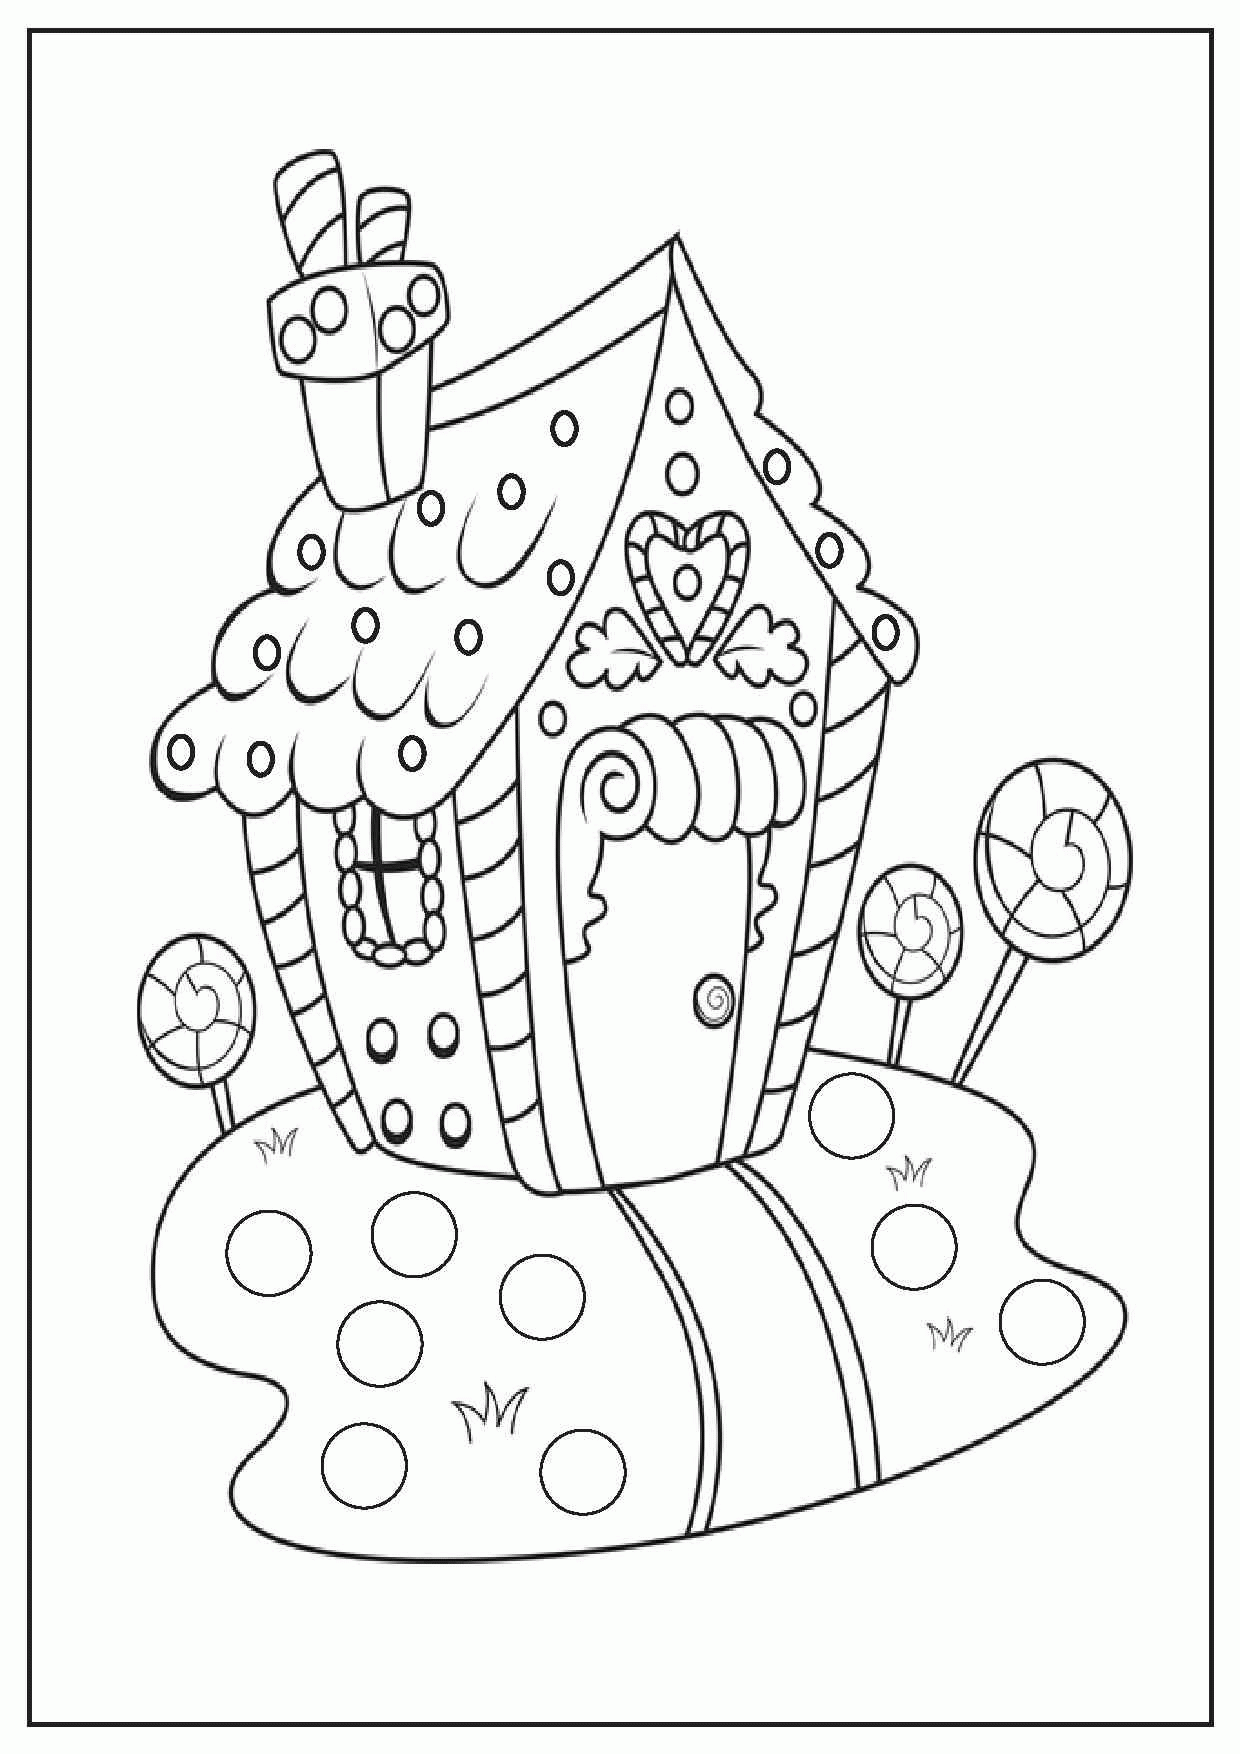 Www.freeprintable Christmas Coloring Pages - Coloring Home